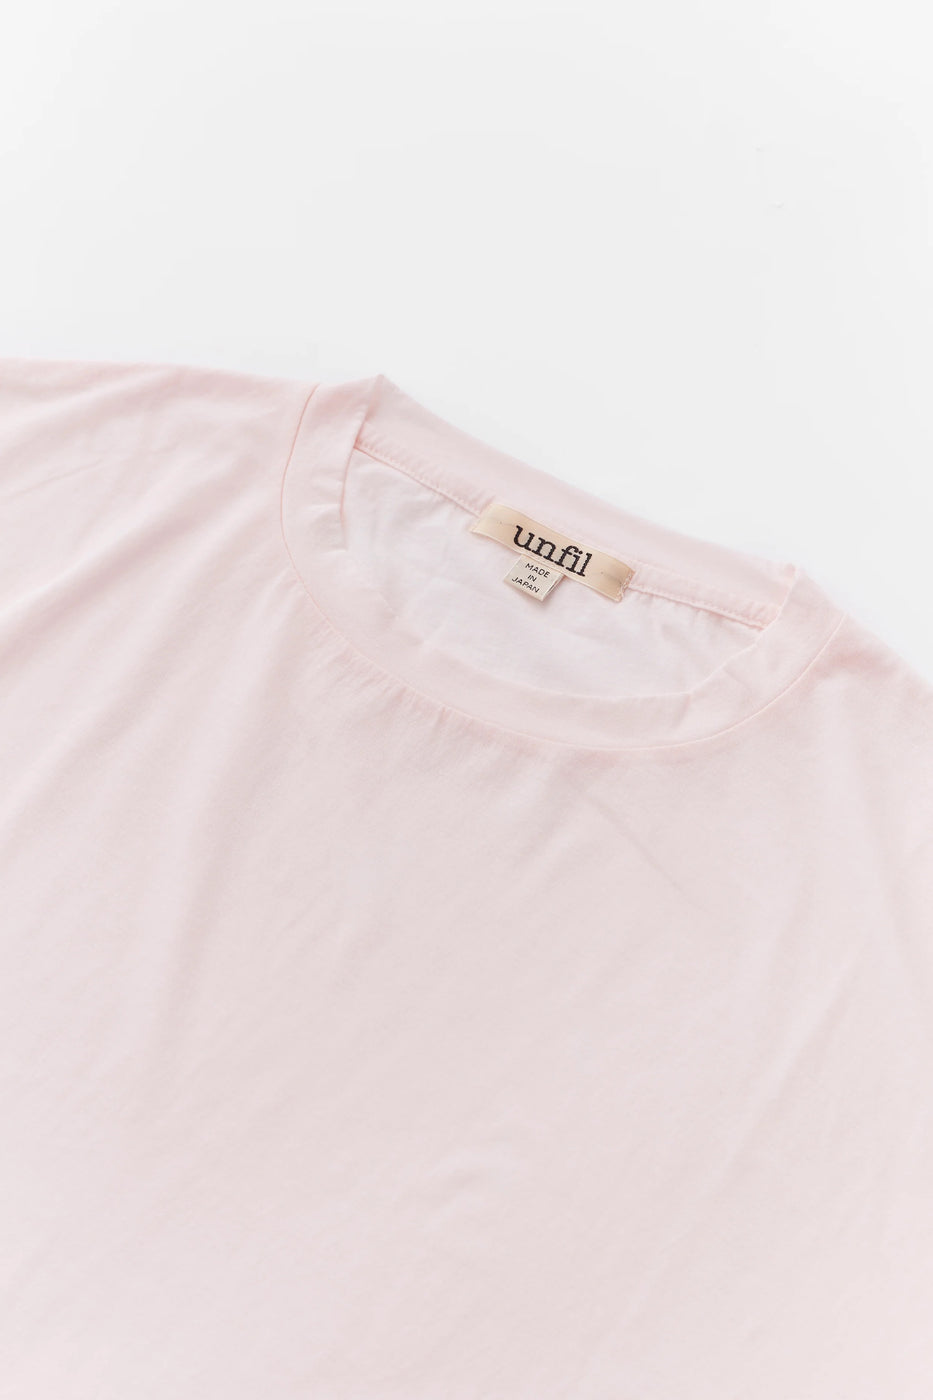 Unfil  twisted cotton sheer jersey long sleeve Tee, Creamy Pink